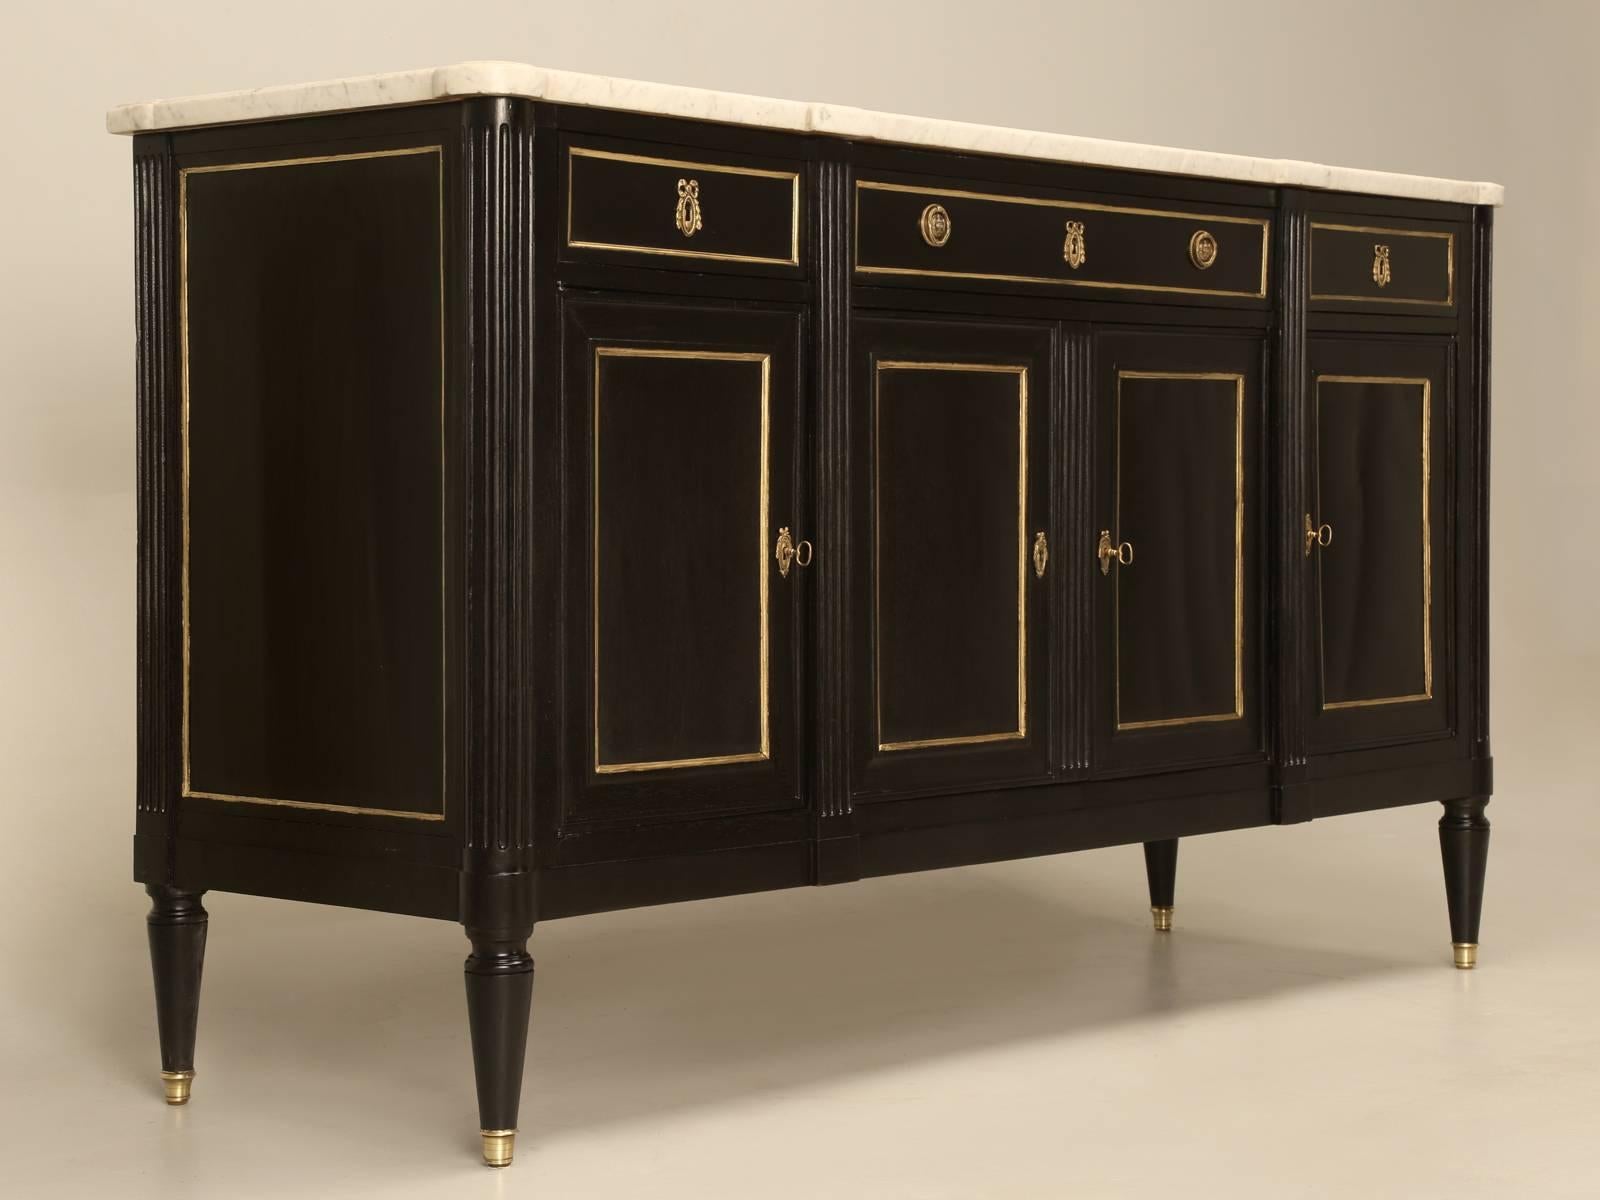 Vintage French Louis XVI style buffet heavily influenced by Jansen. The carcass was structurally restored by our Old Plank restoration department, before the entire buffet was hand-stripped to the bare wood and then slowly ebonized to a rich black